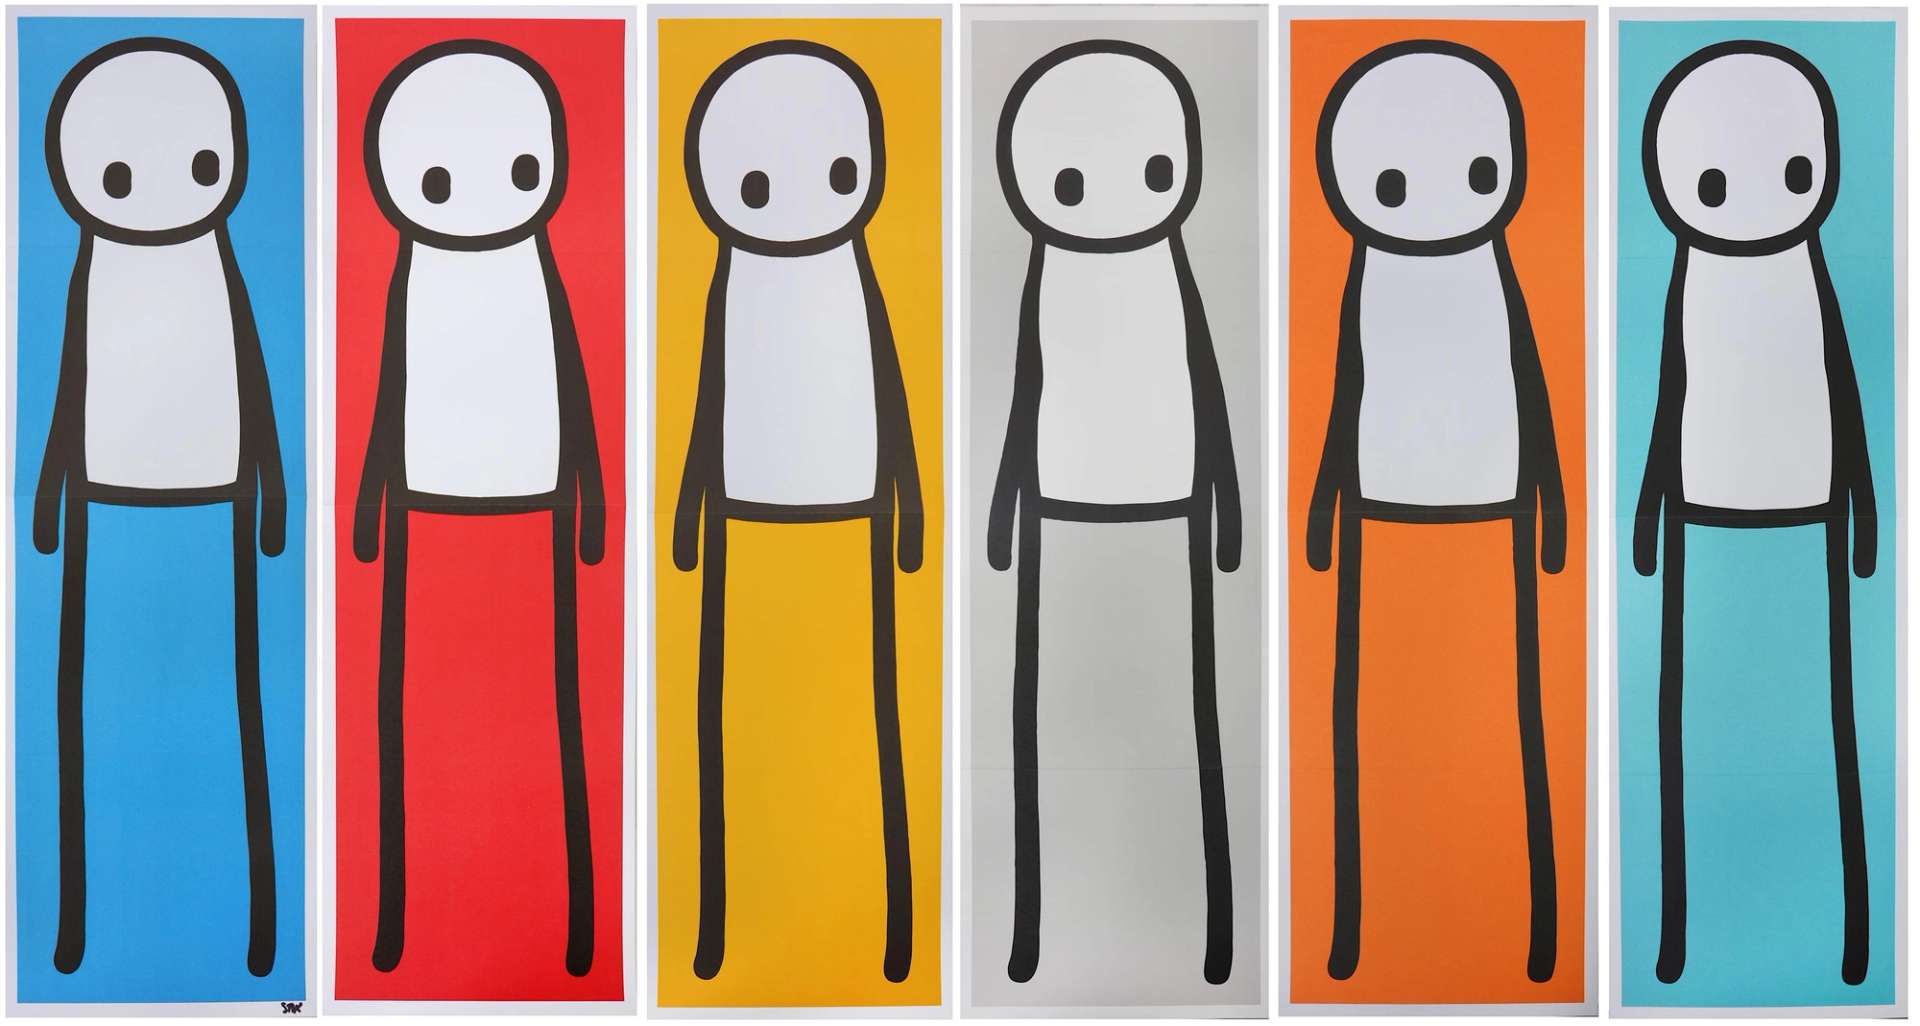 10 Facts About Stik's Standing Figure